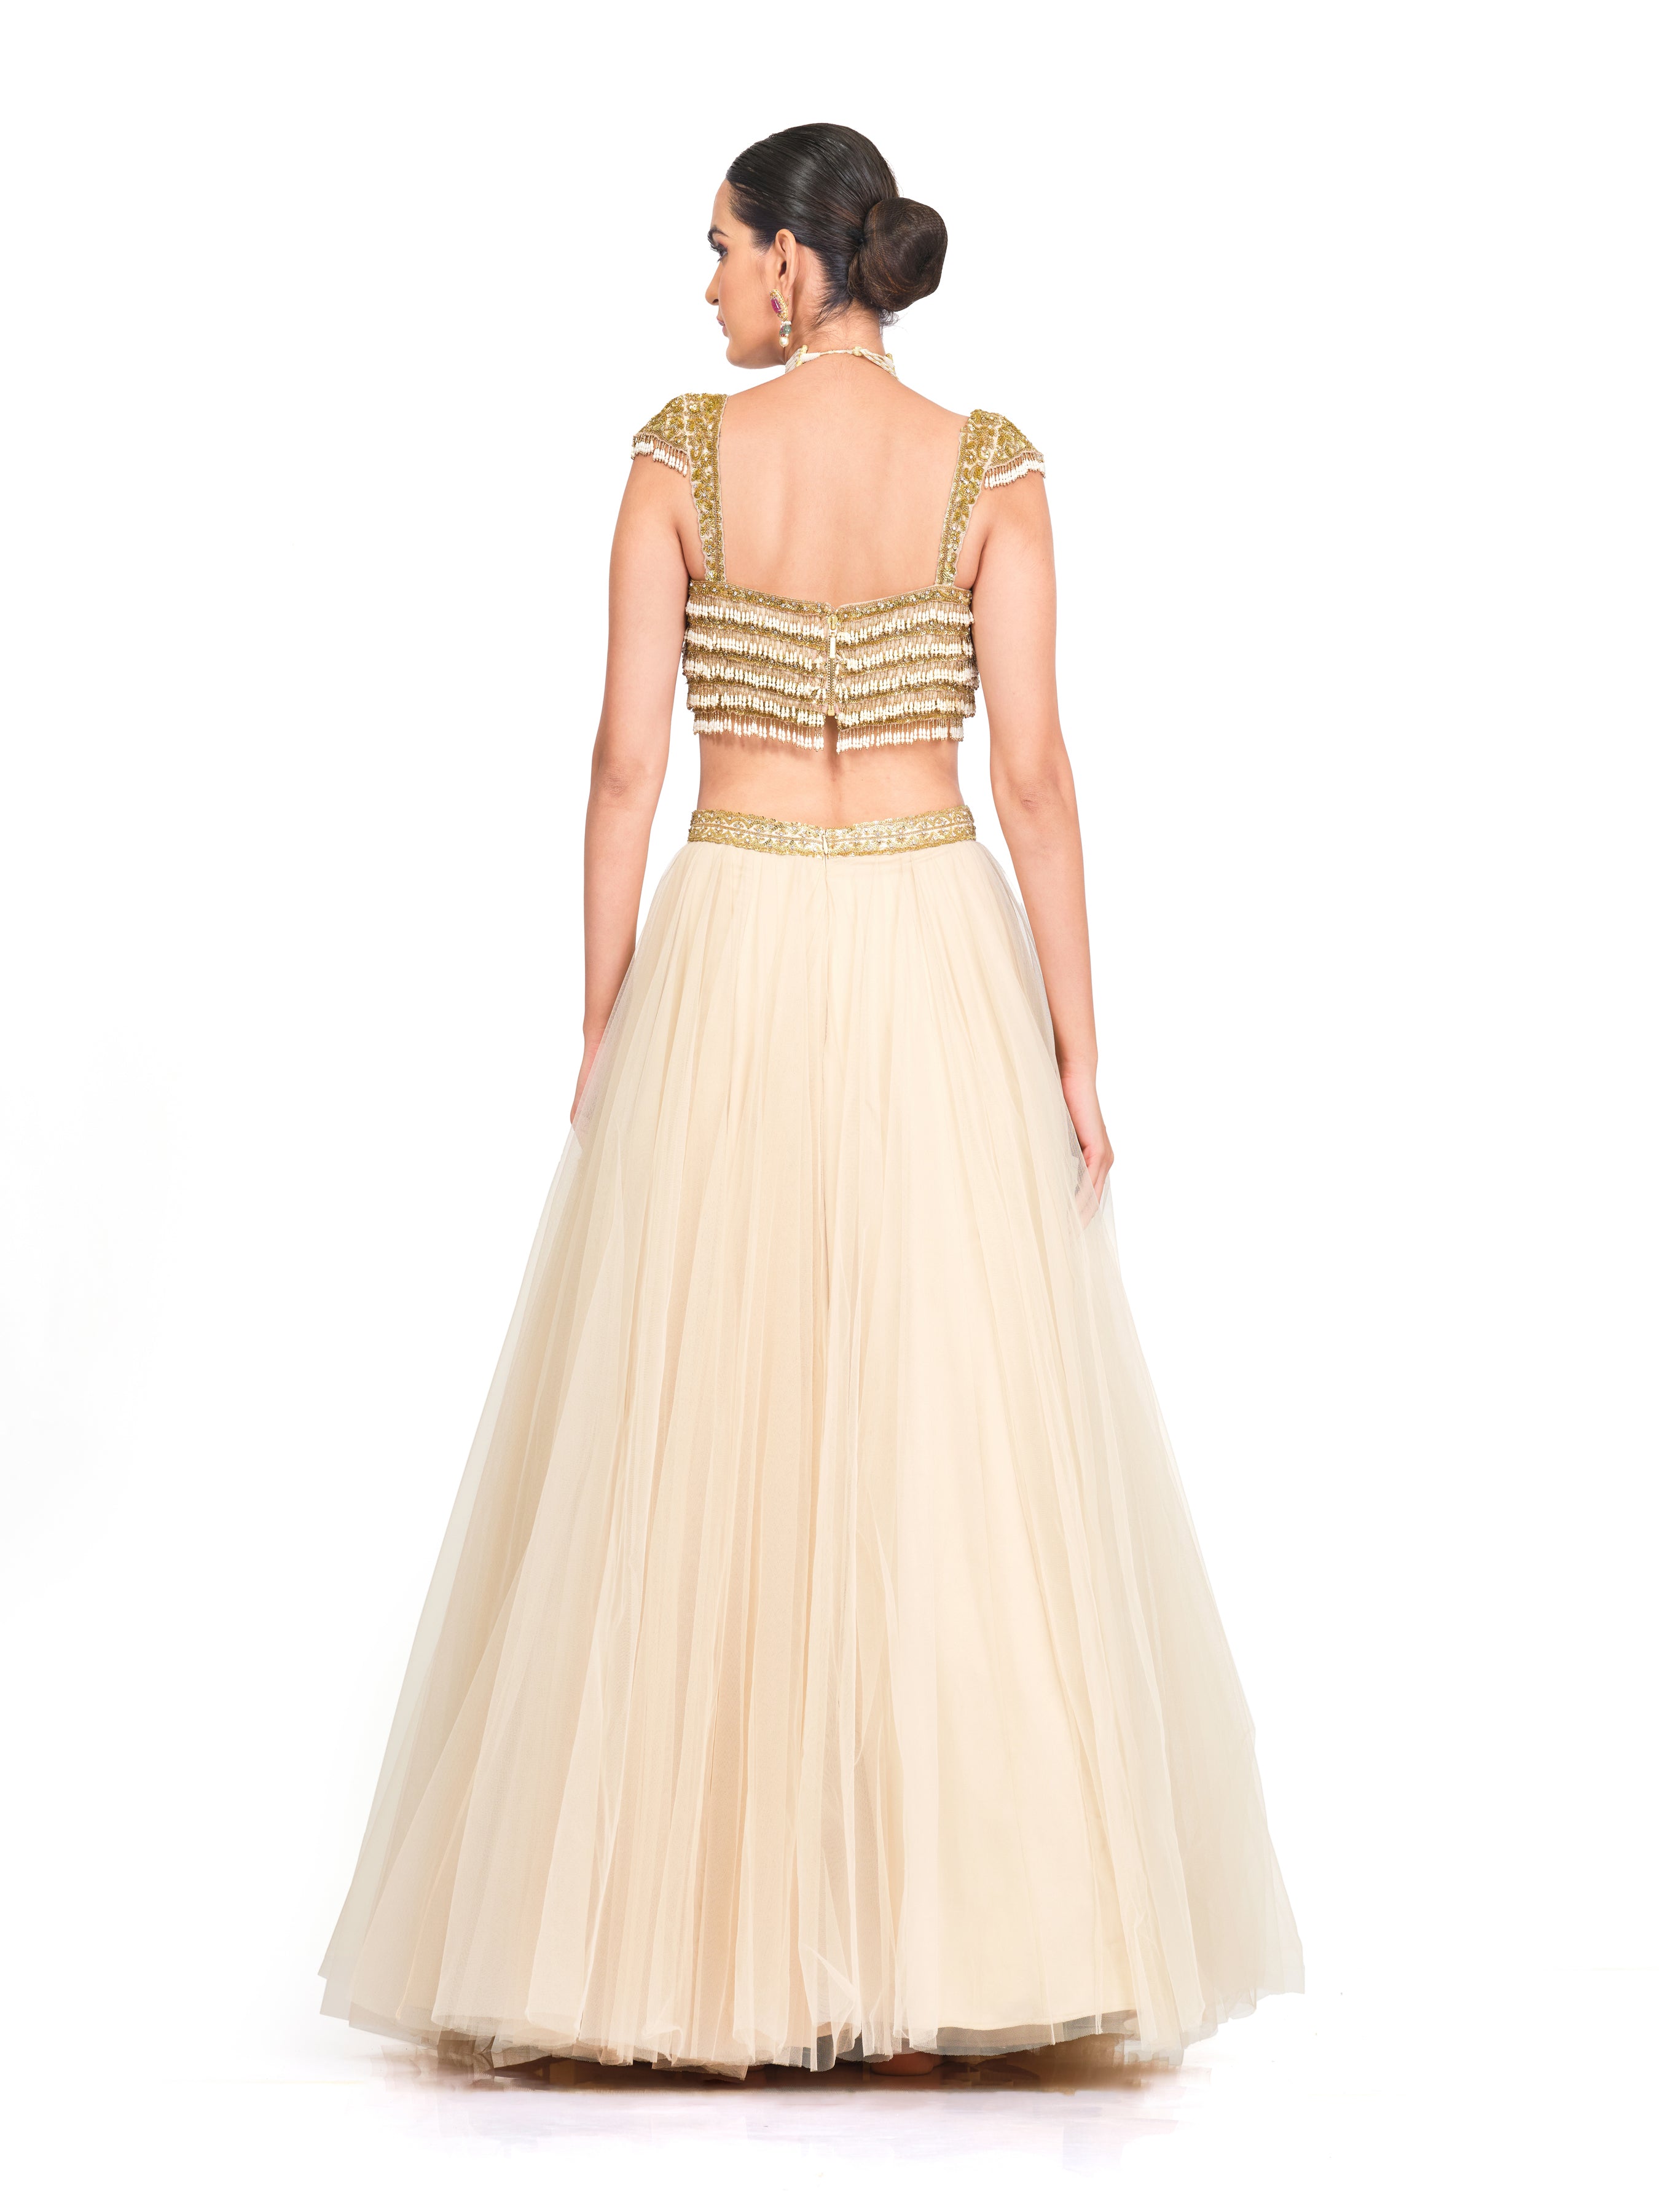 Tulle Lehenga With Tassel Strapped Bloused